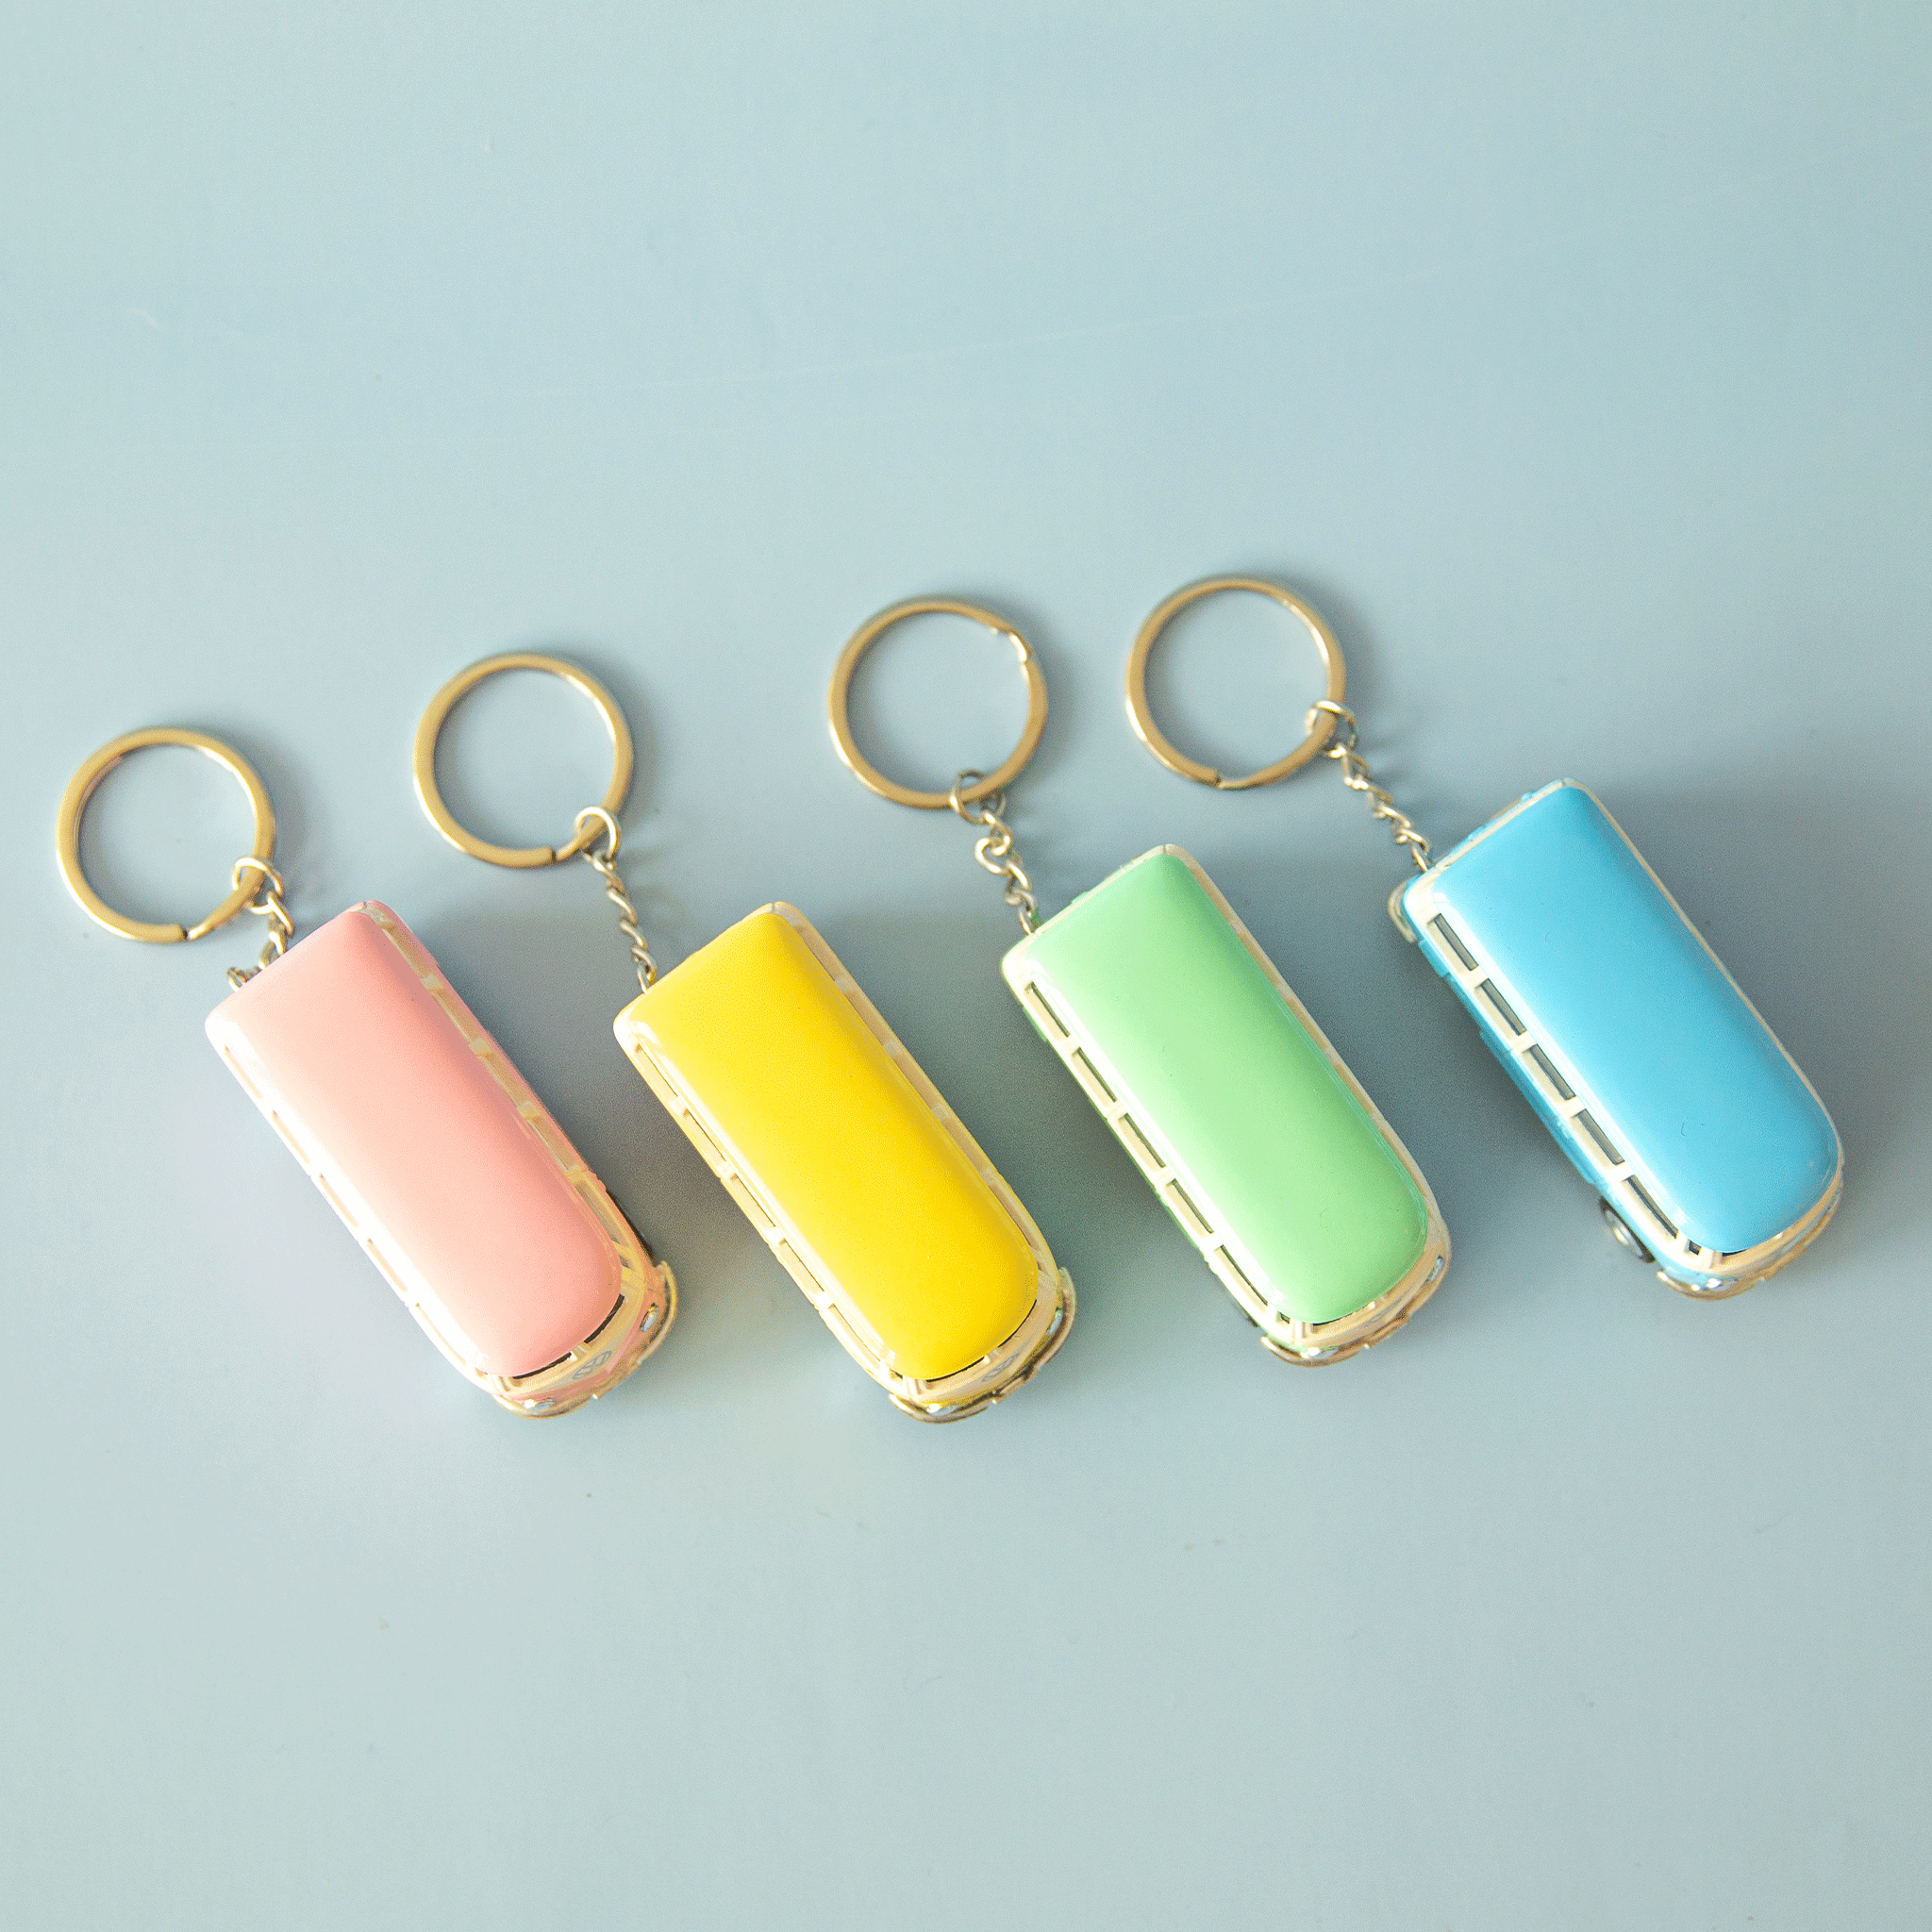 On a blue background is four VW bus shaped keychains in pink, yellow, green and blue. Each color sold separately.